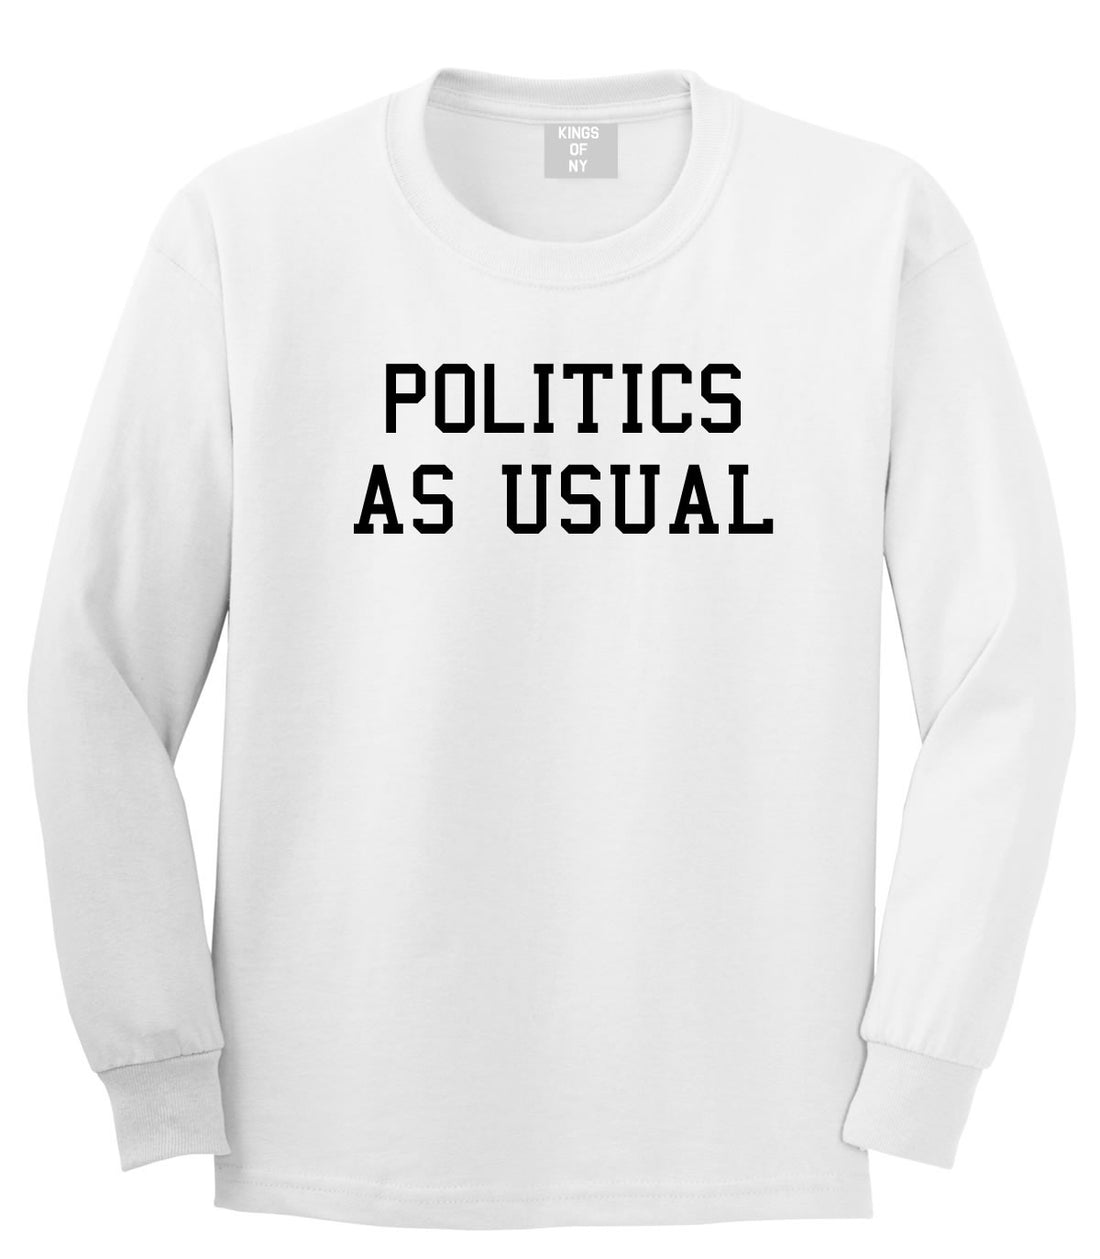 Politics As Usual Hiphop Lyrics Jay 23 Z Old School Long Sleeve T-Shirt in White by Kings Of NY